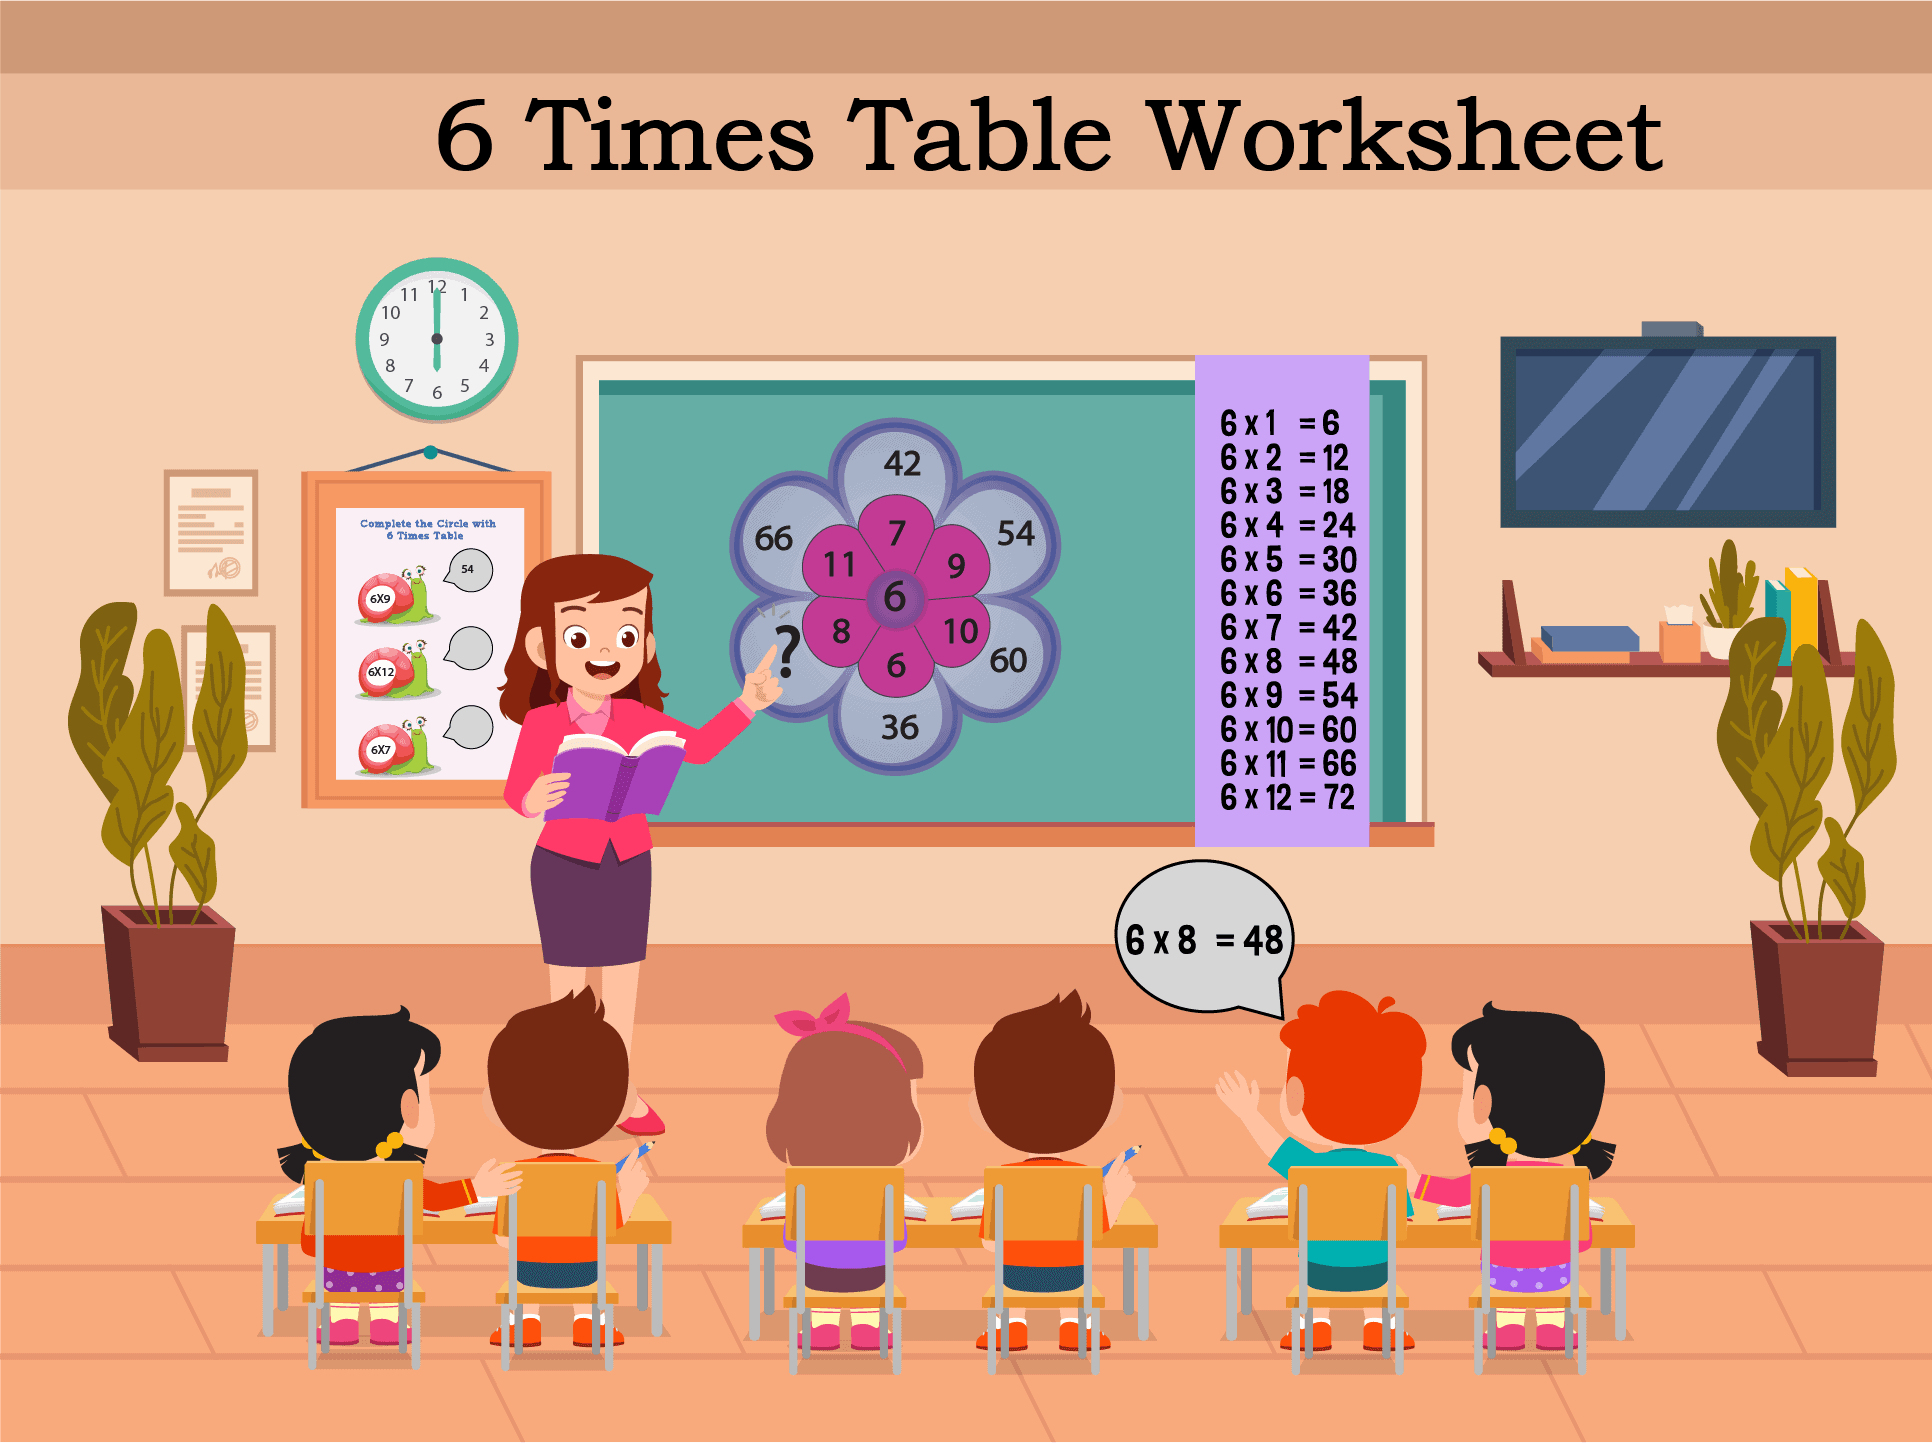 7 Free 6 Times Table Worksheets | Fun Learning